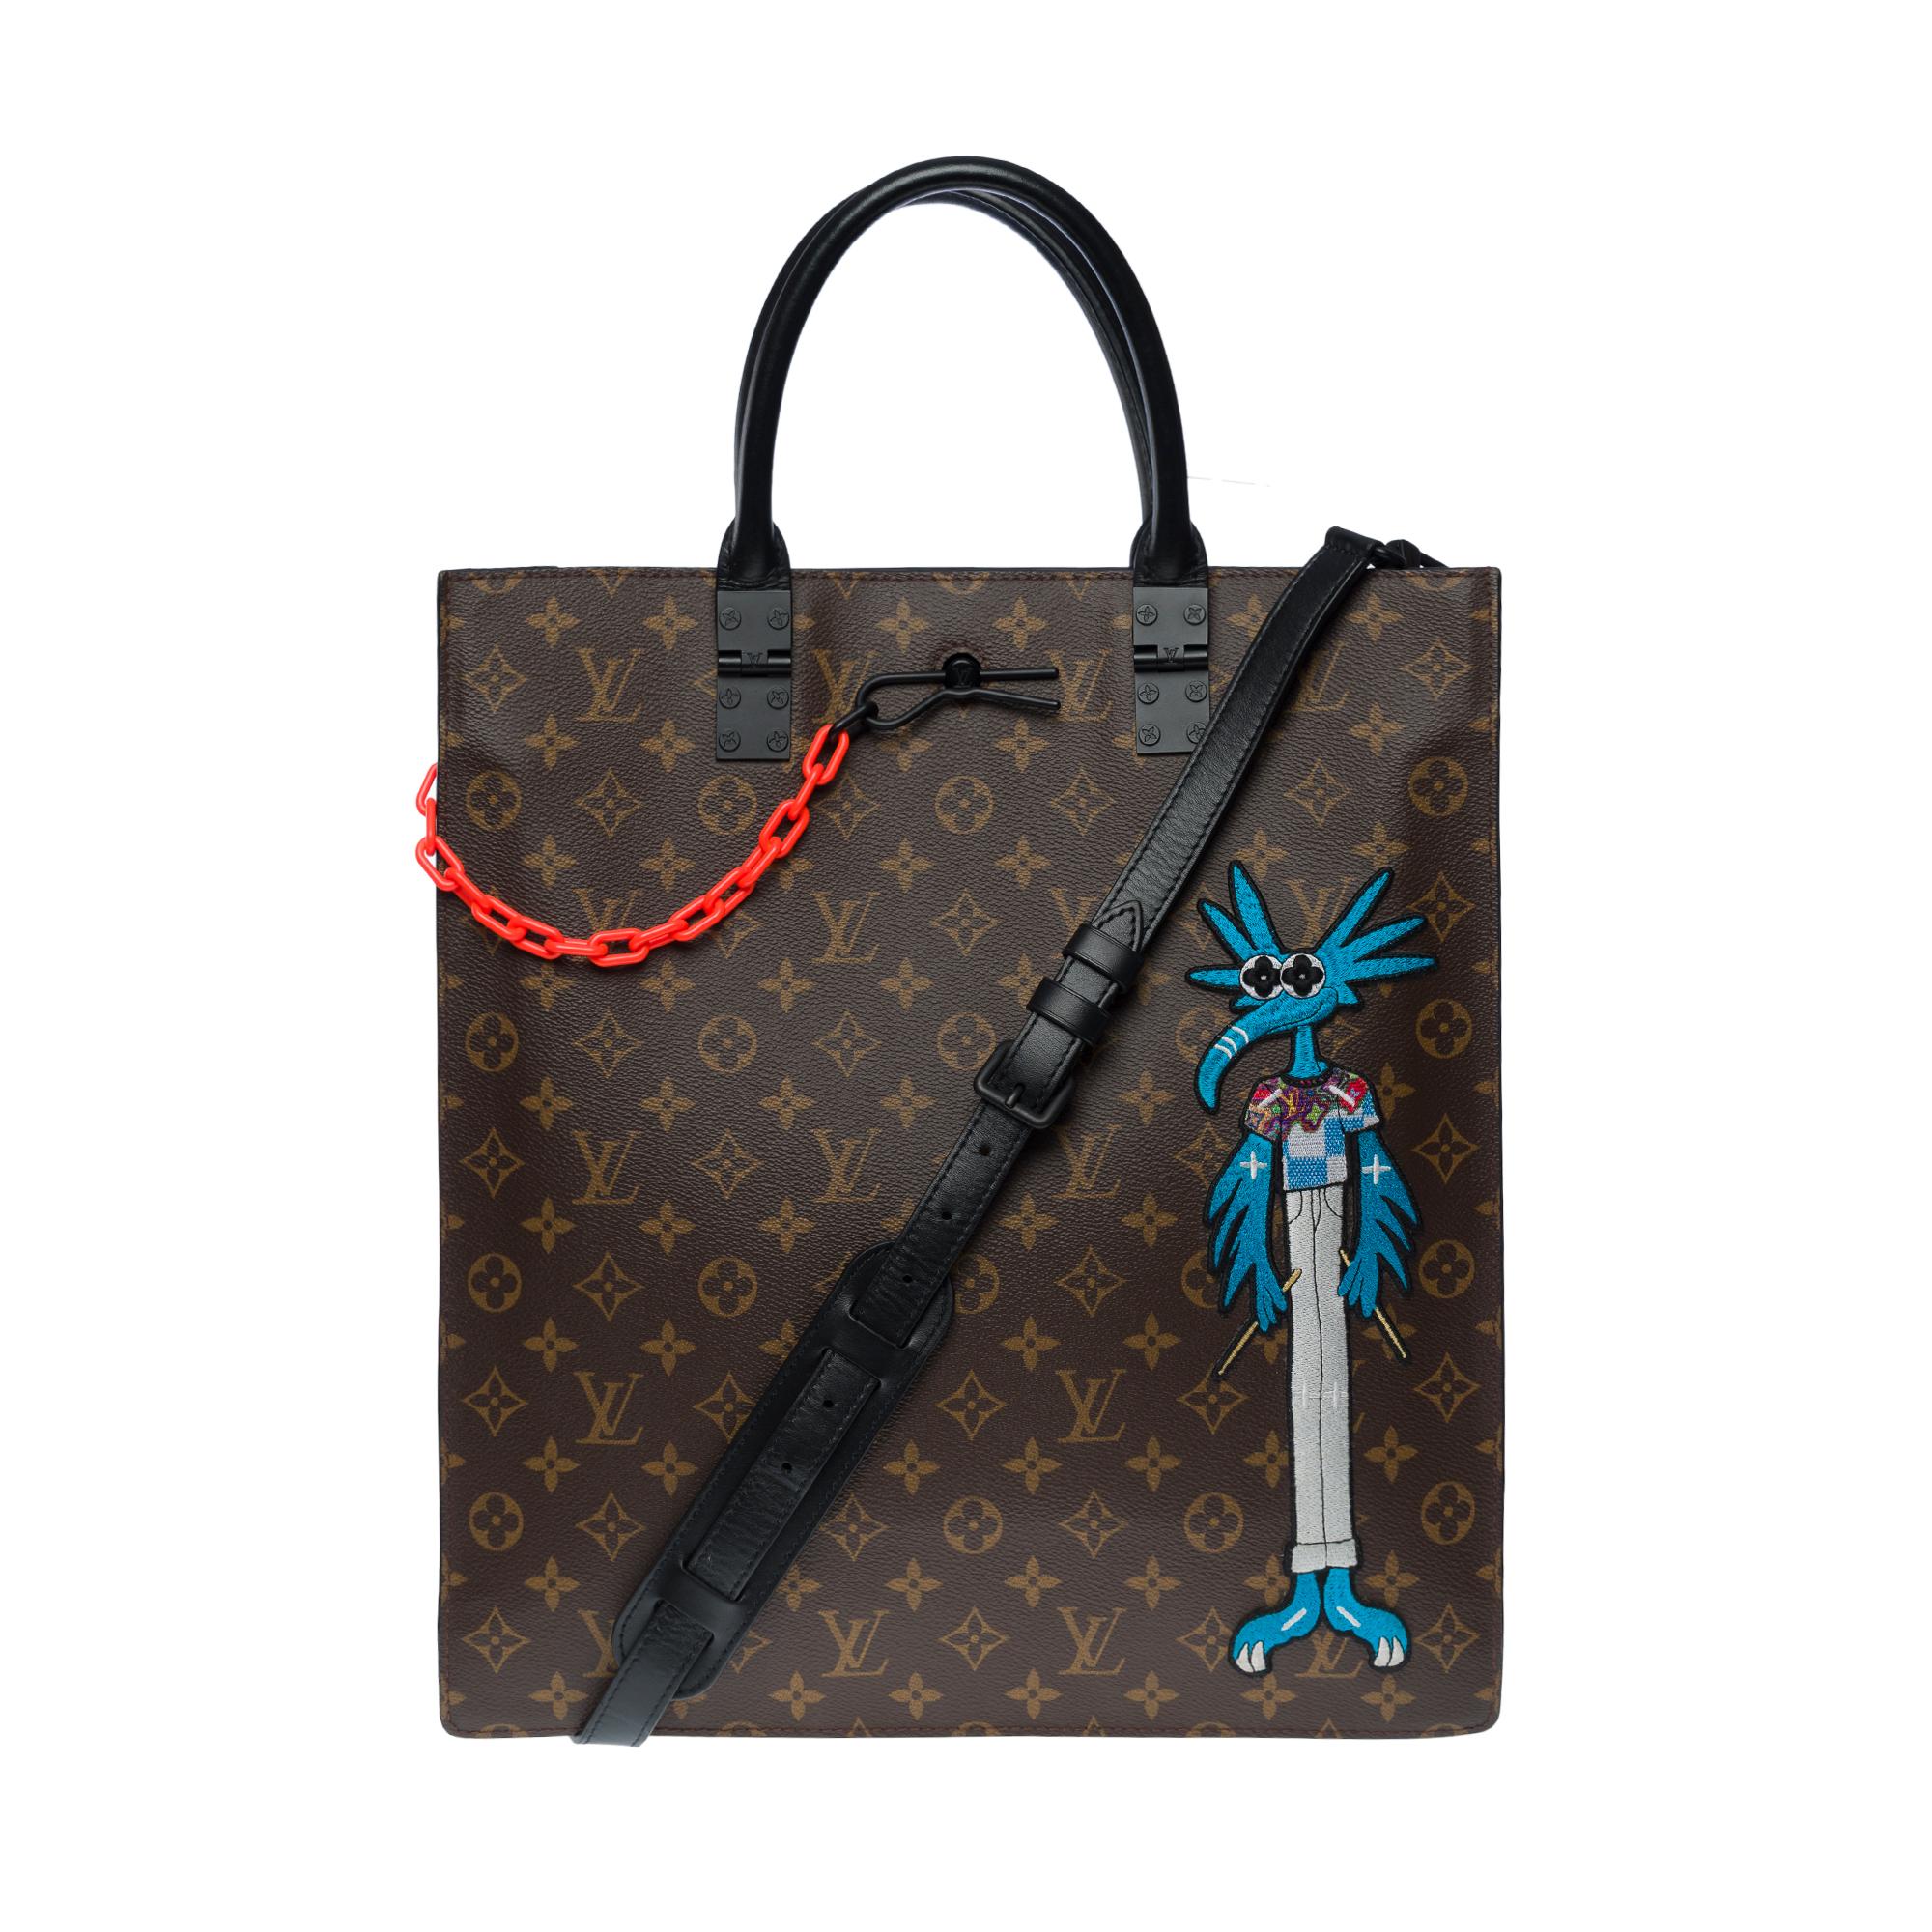 The classic Louis Vuitton monogram is elevated in this amazing and rare piece with Virgil Abloh's signature colourful chain and cartoon character patch from his animated film for the Louis Vuitton Men's Spring-Summer 2021 show. Featuring a matte